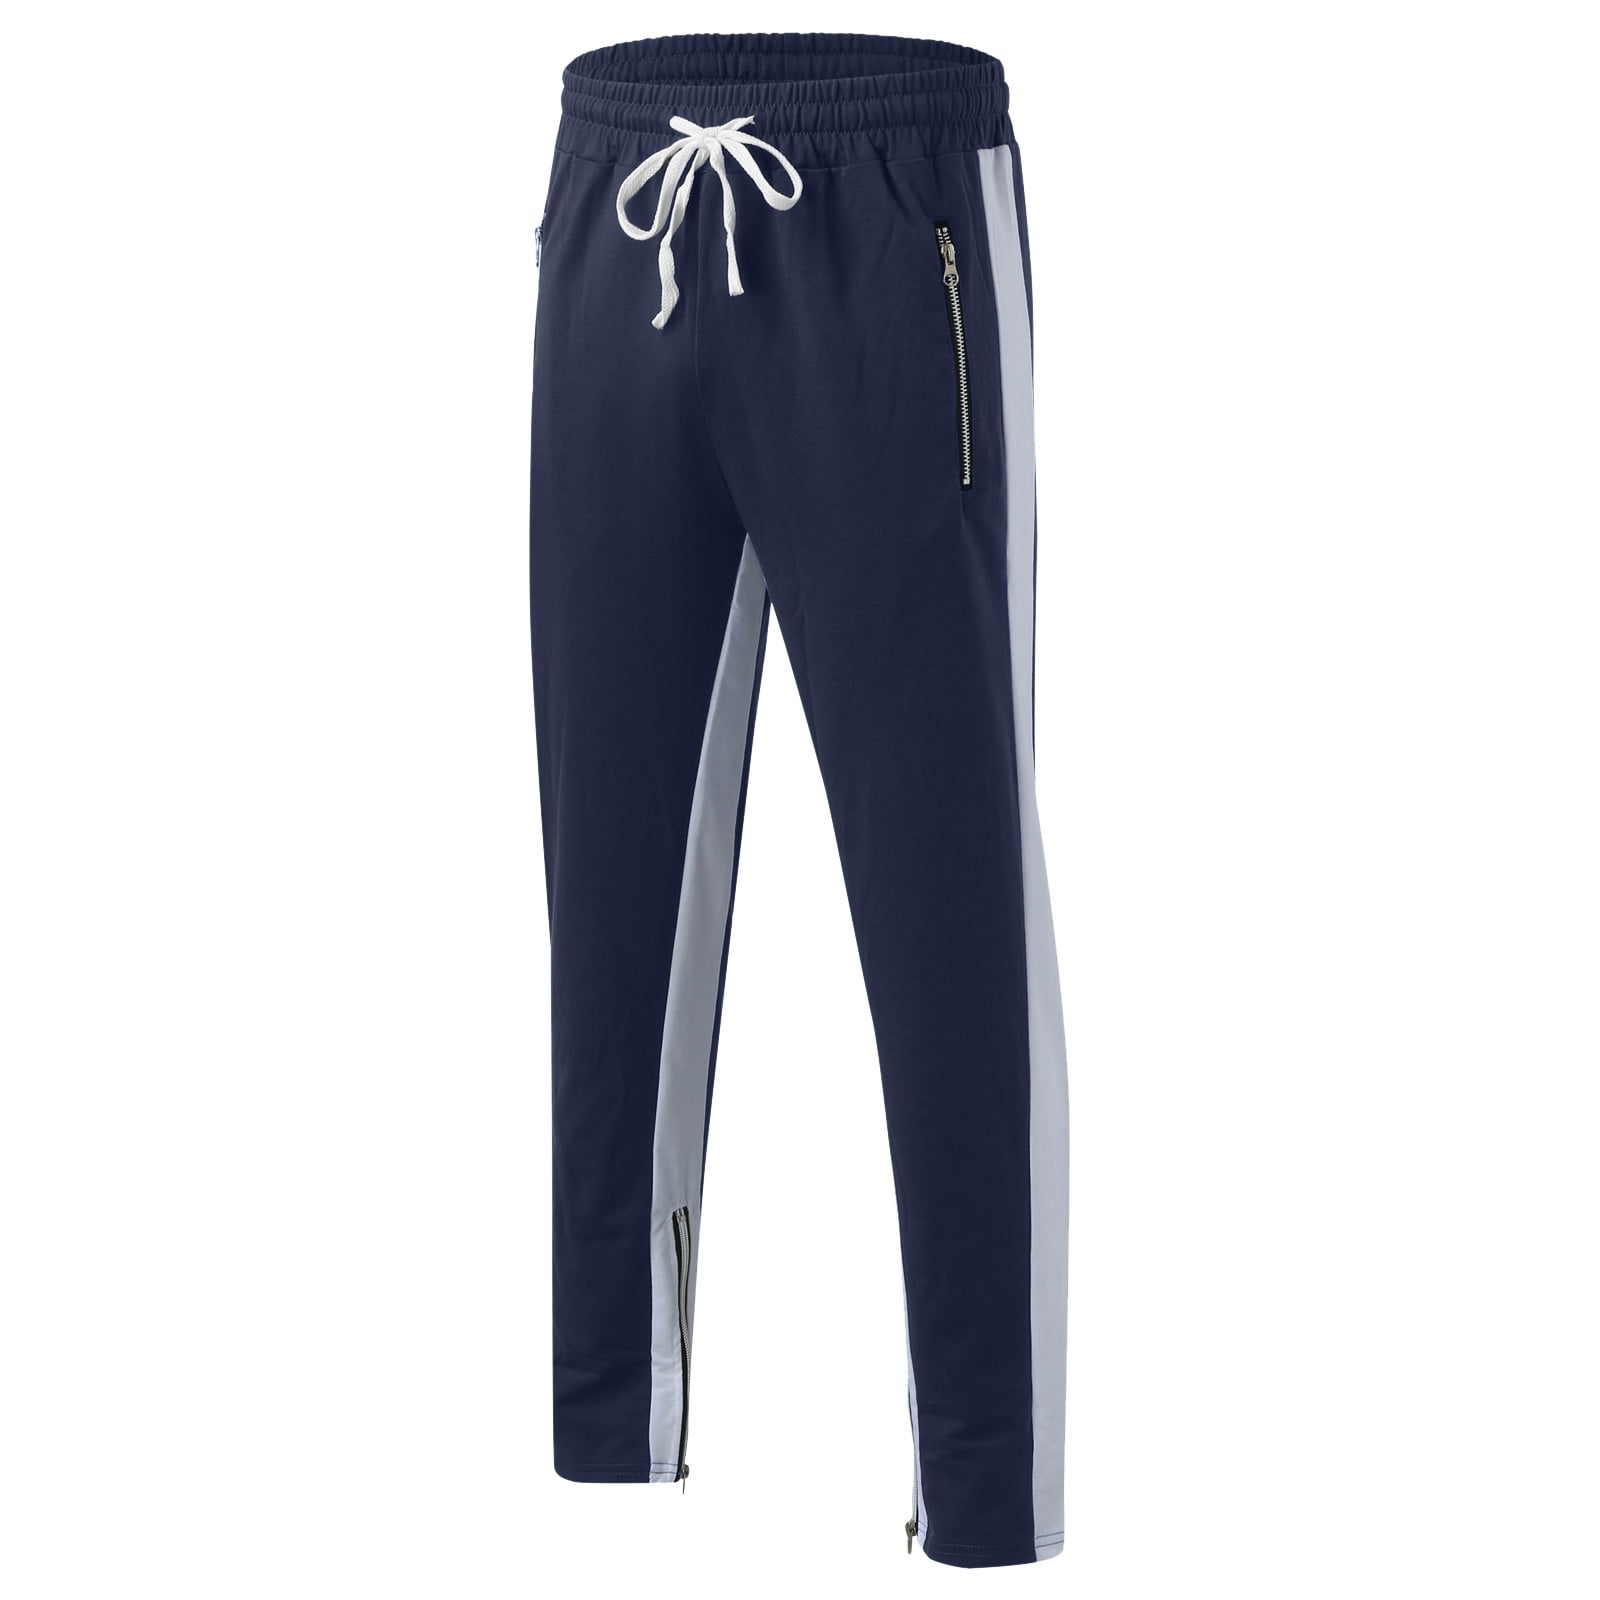 10 Styles Of Track Pants To Put On This Season - Tagsweekly